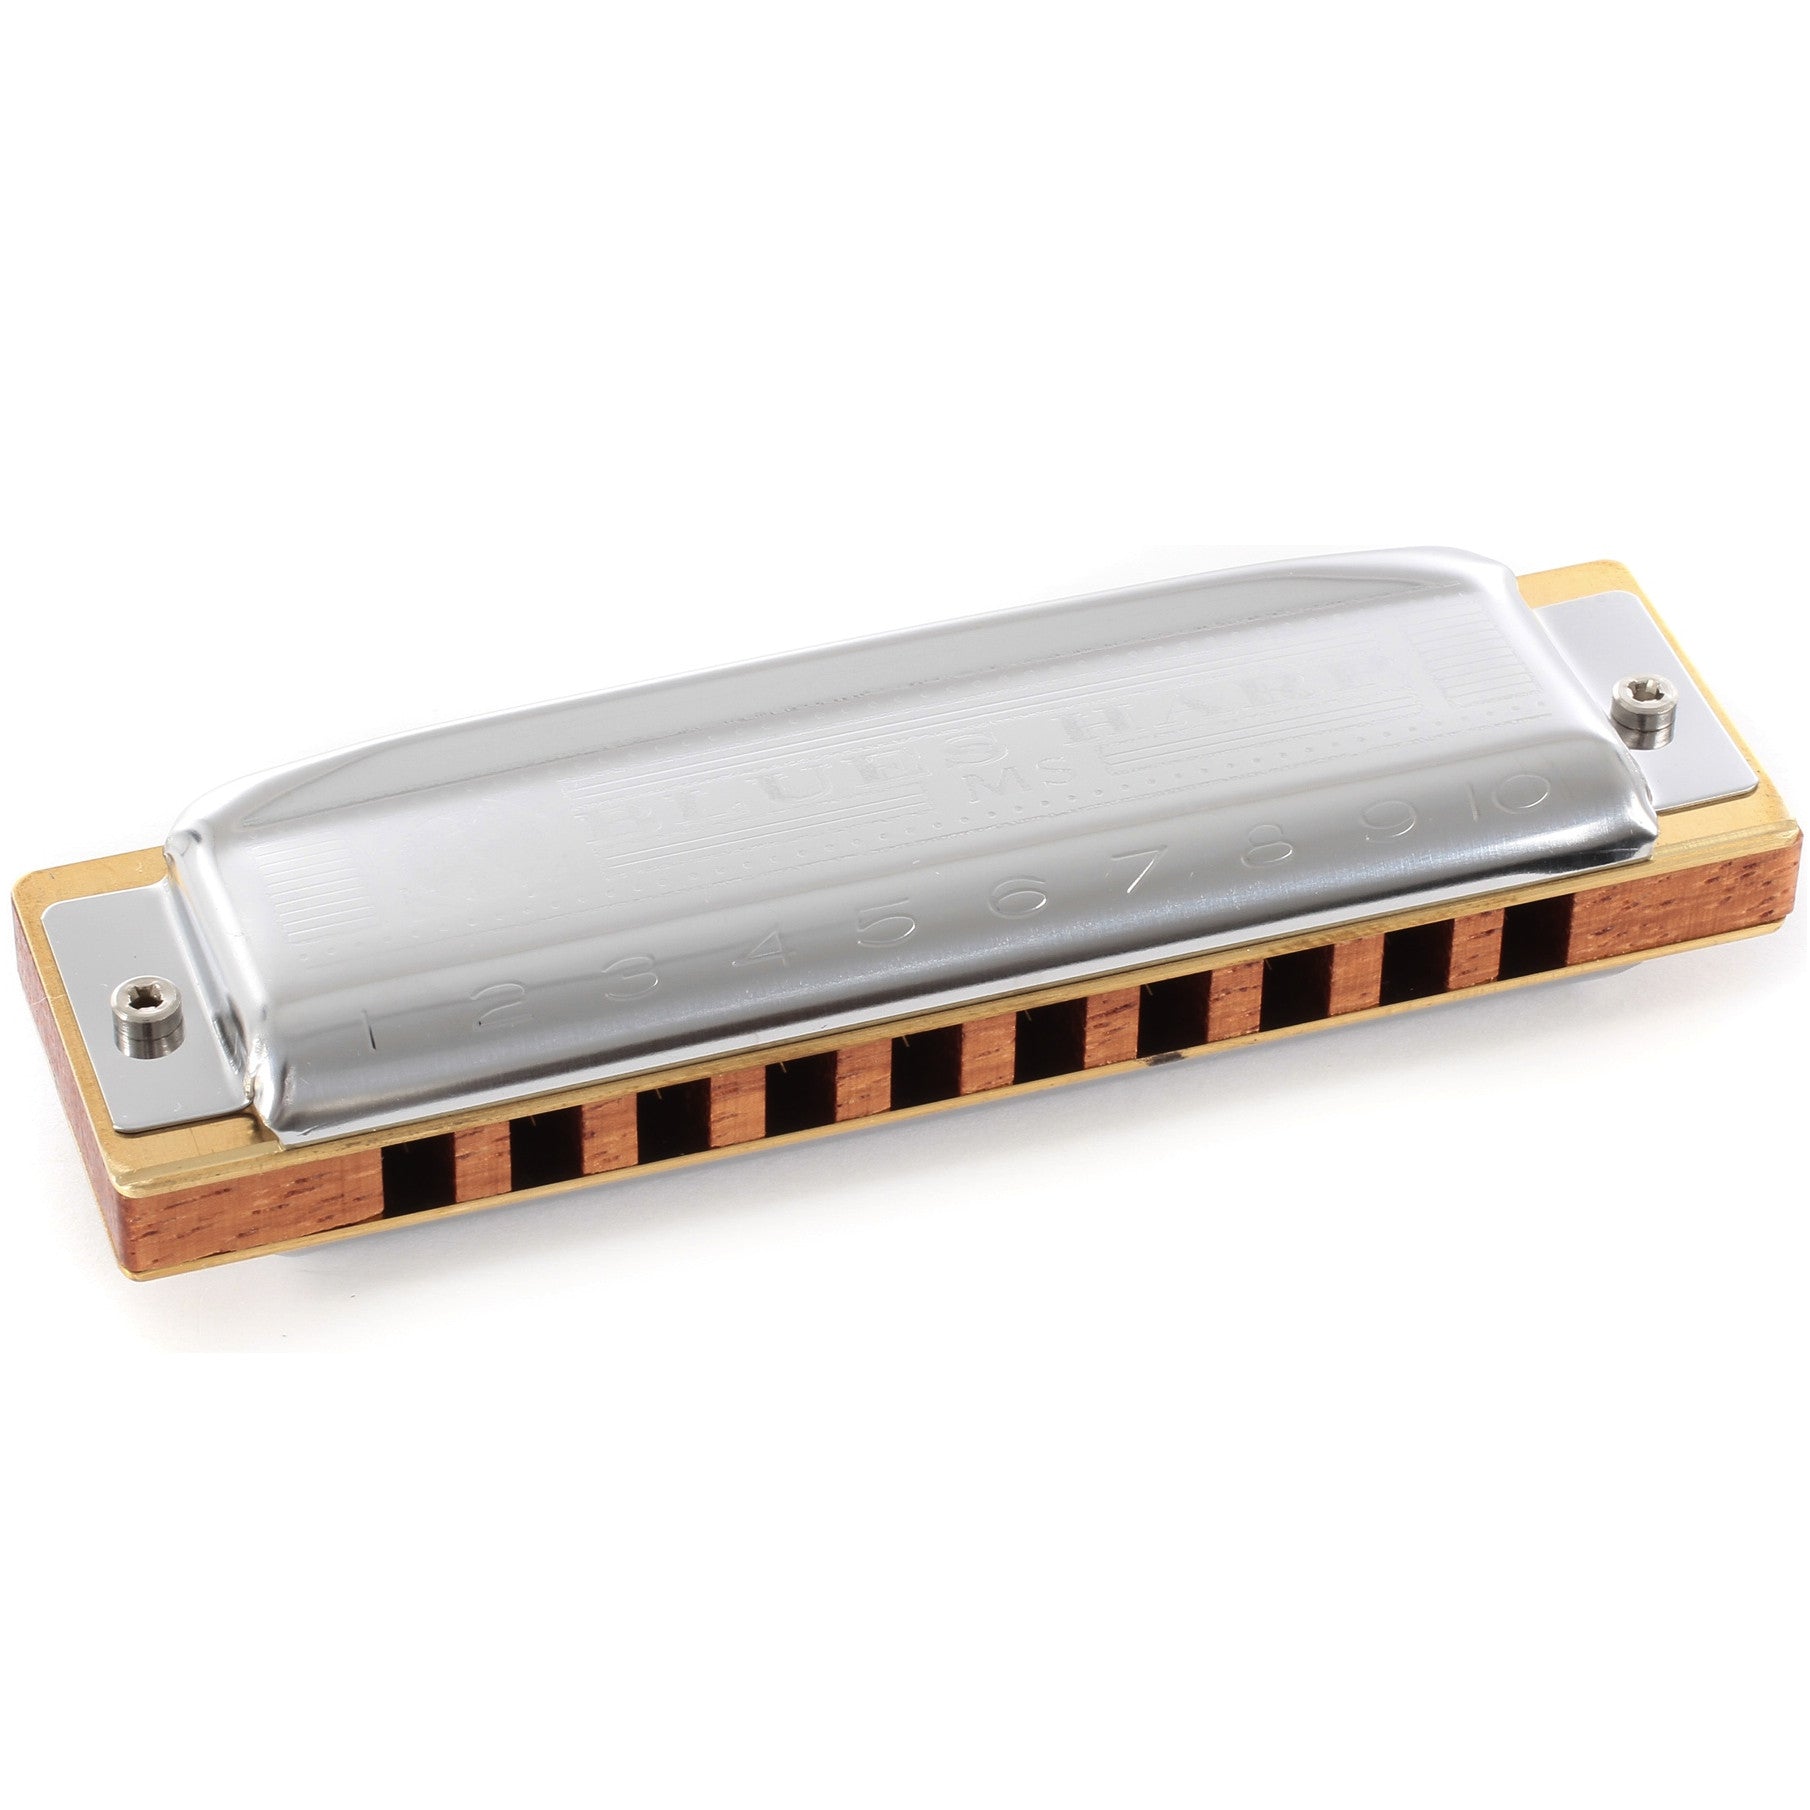 Hohner 532 Blues Harp MS-Series Harmonica in Key of F